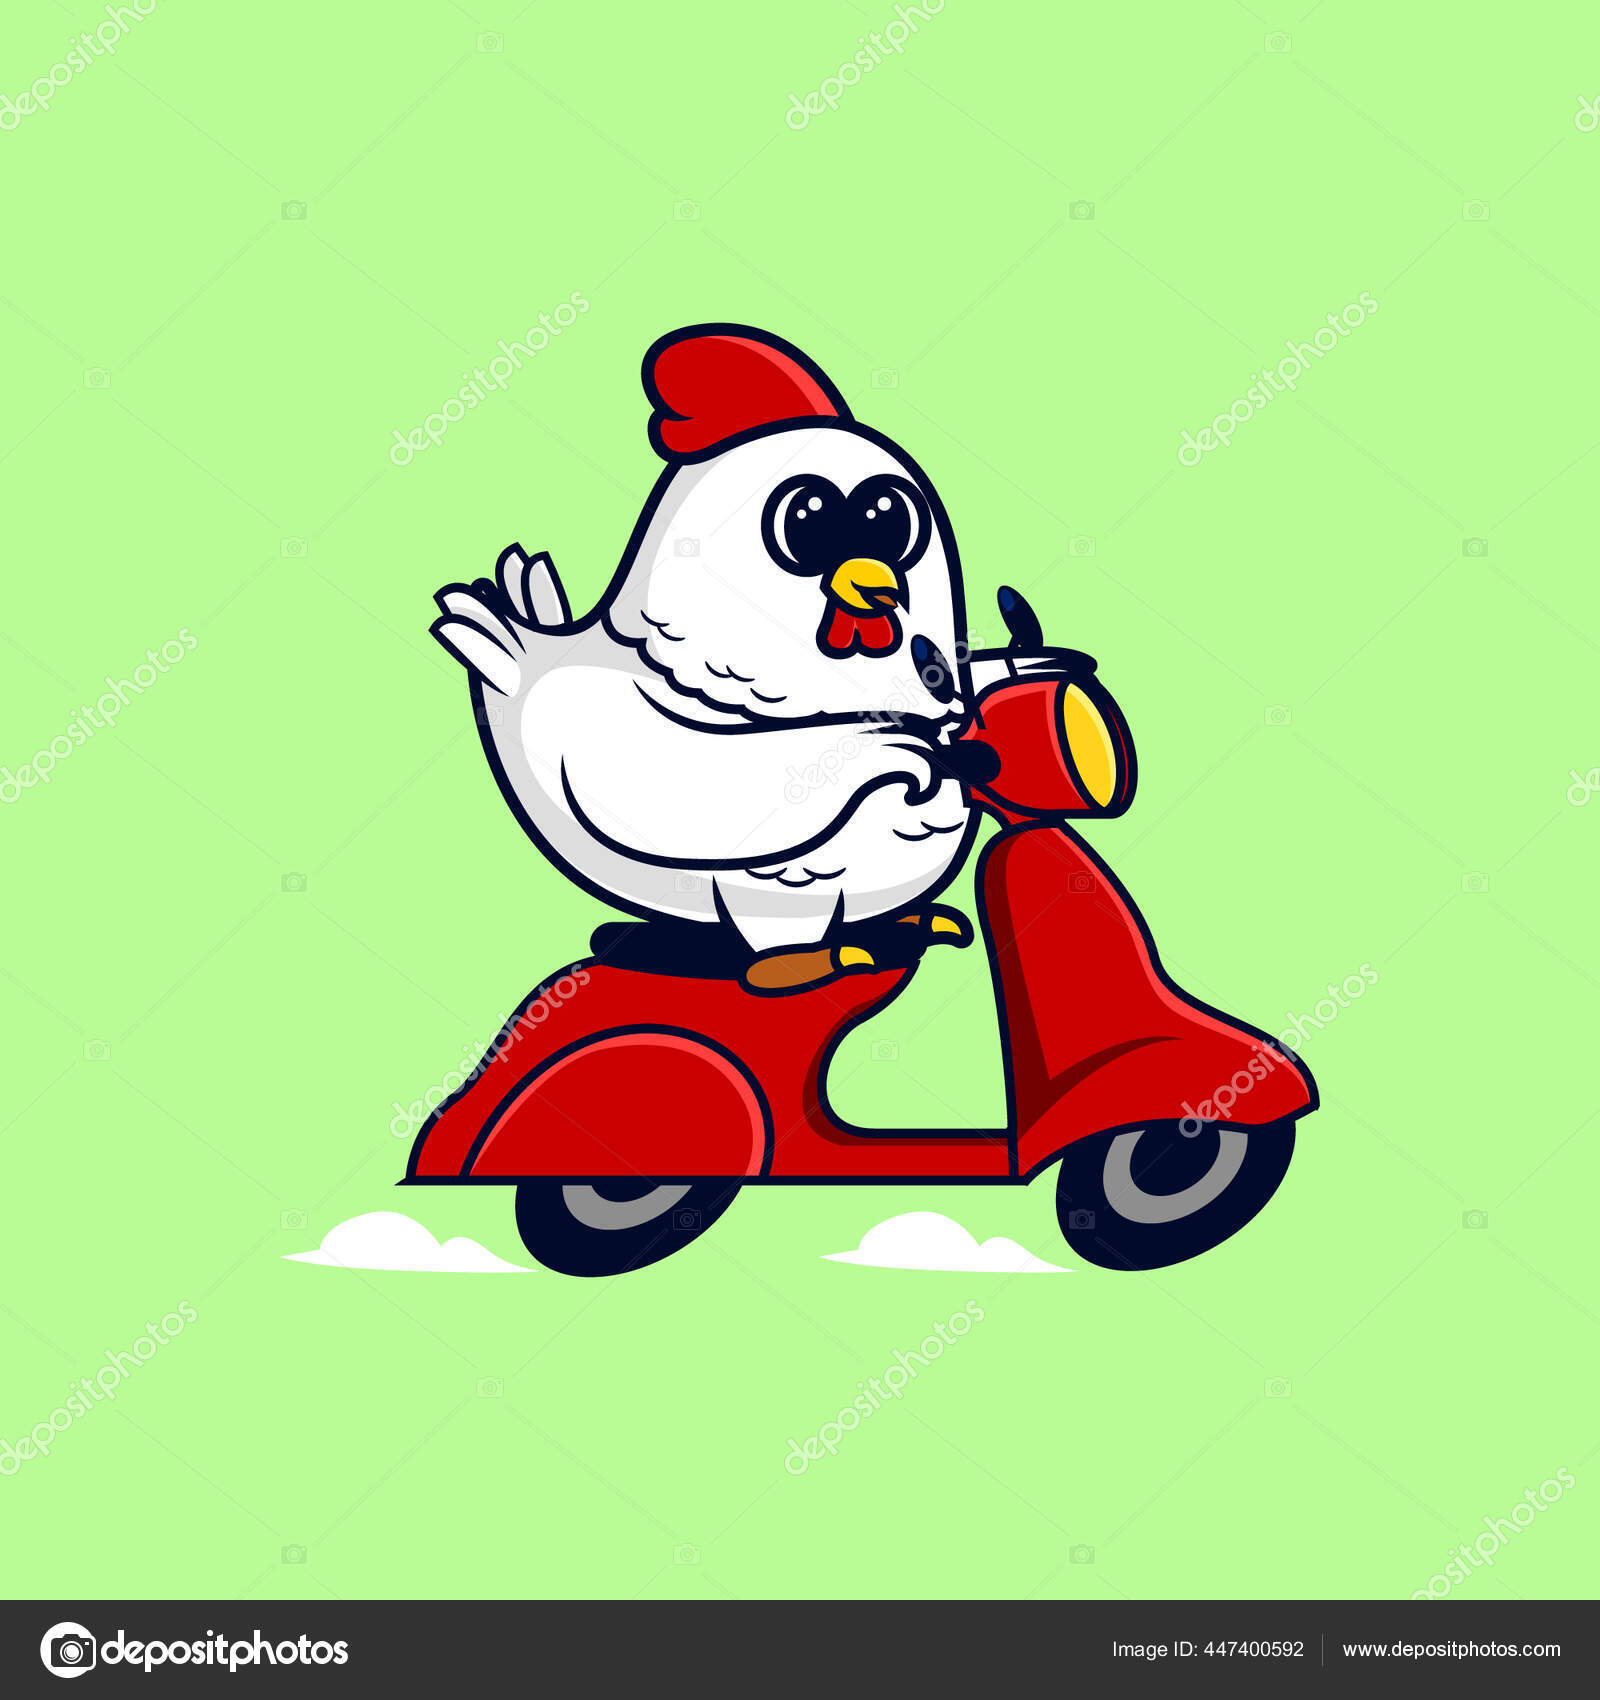 Premium Vector  Moped sticker vector illustration in flat style